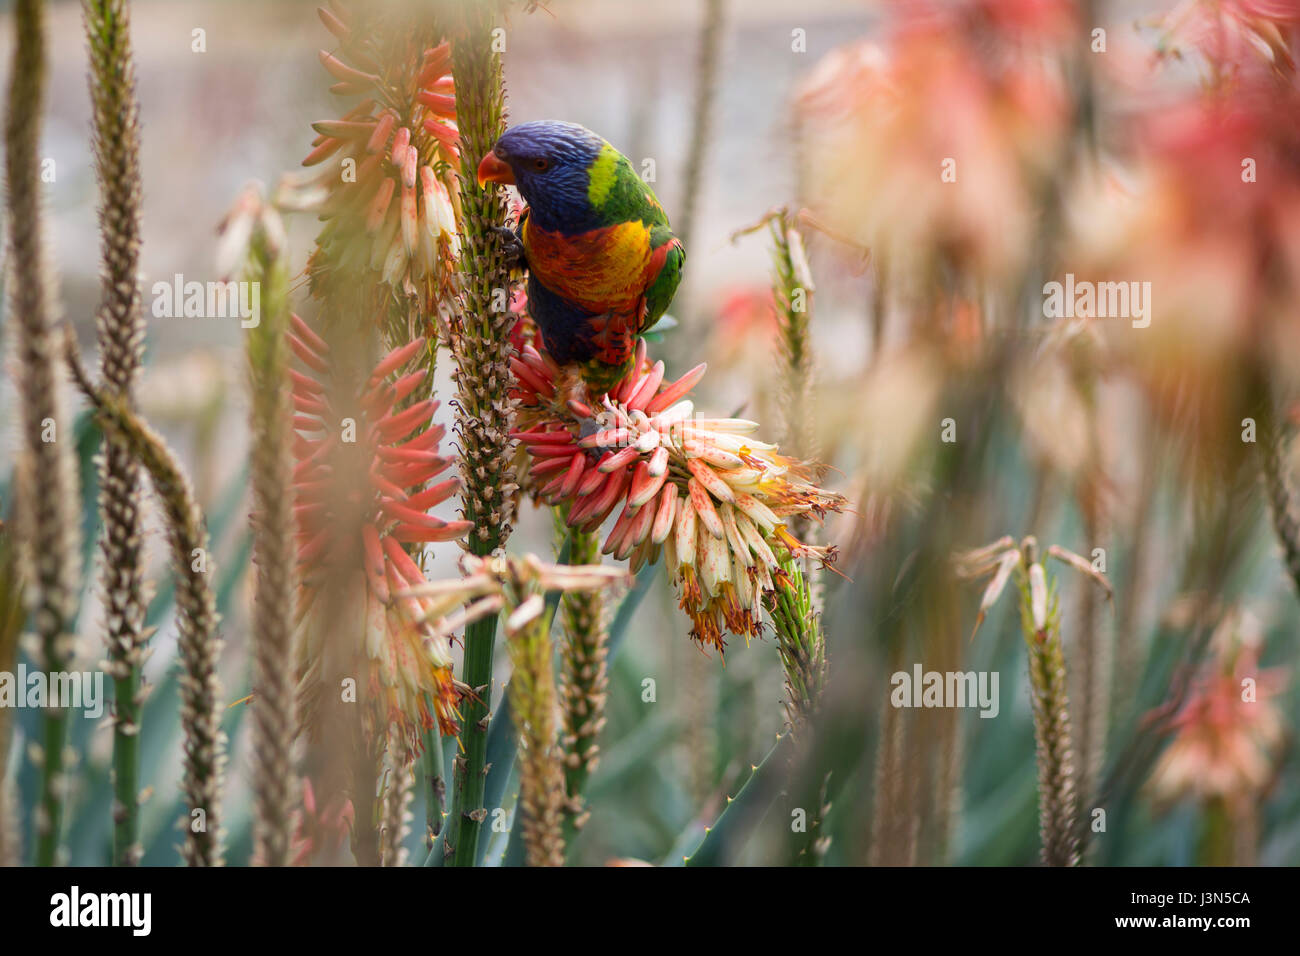 Rainbow Lorikeet in the aloe flowers taken at the Adelaide Botanic Garden. Primary focus on just the bird with very shallow depth of field. Stock Photo